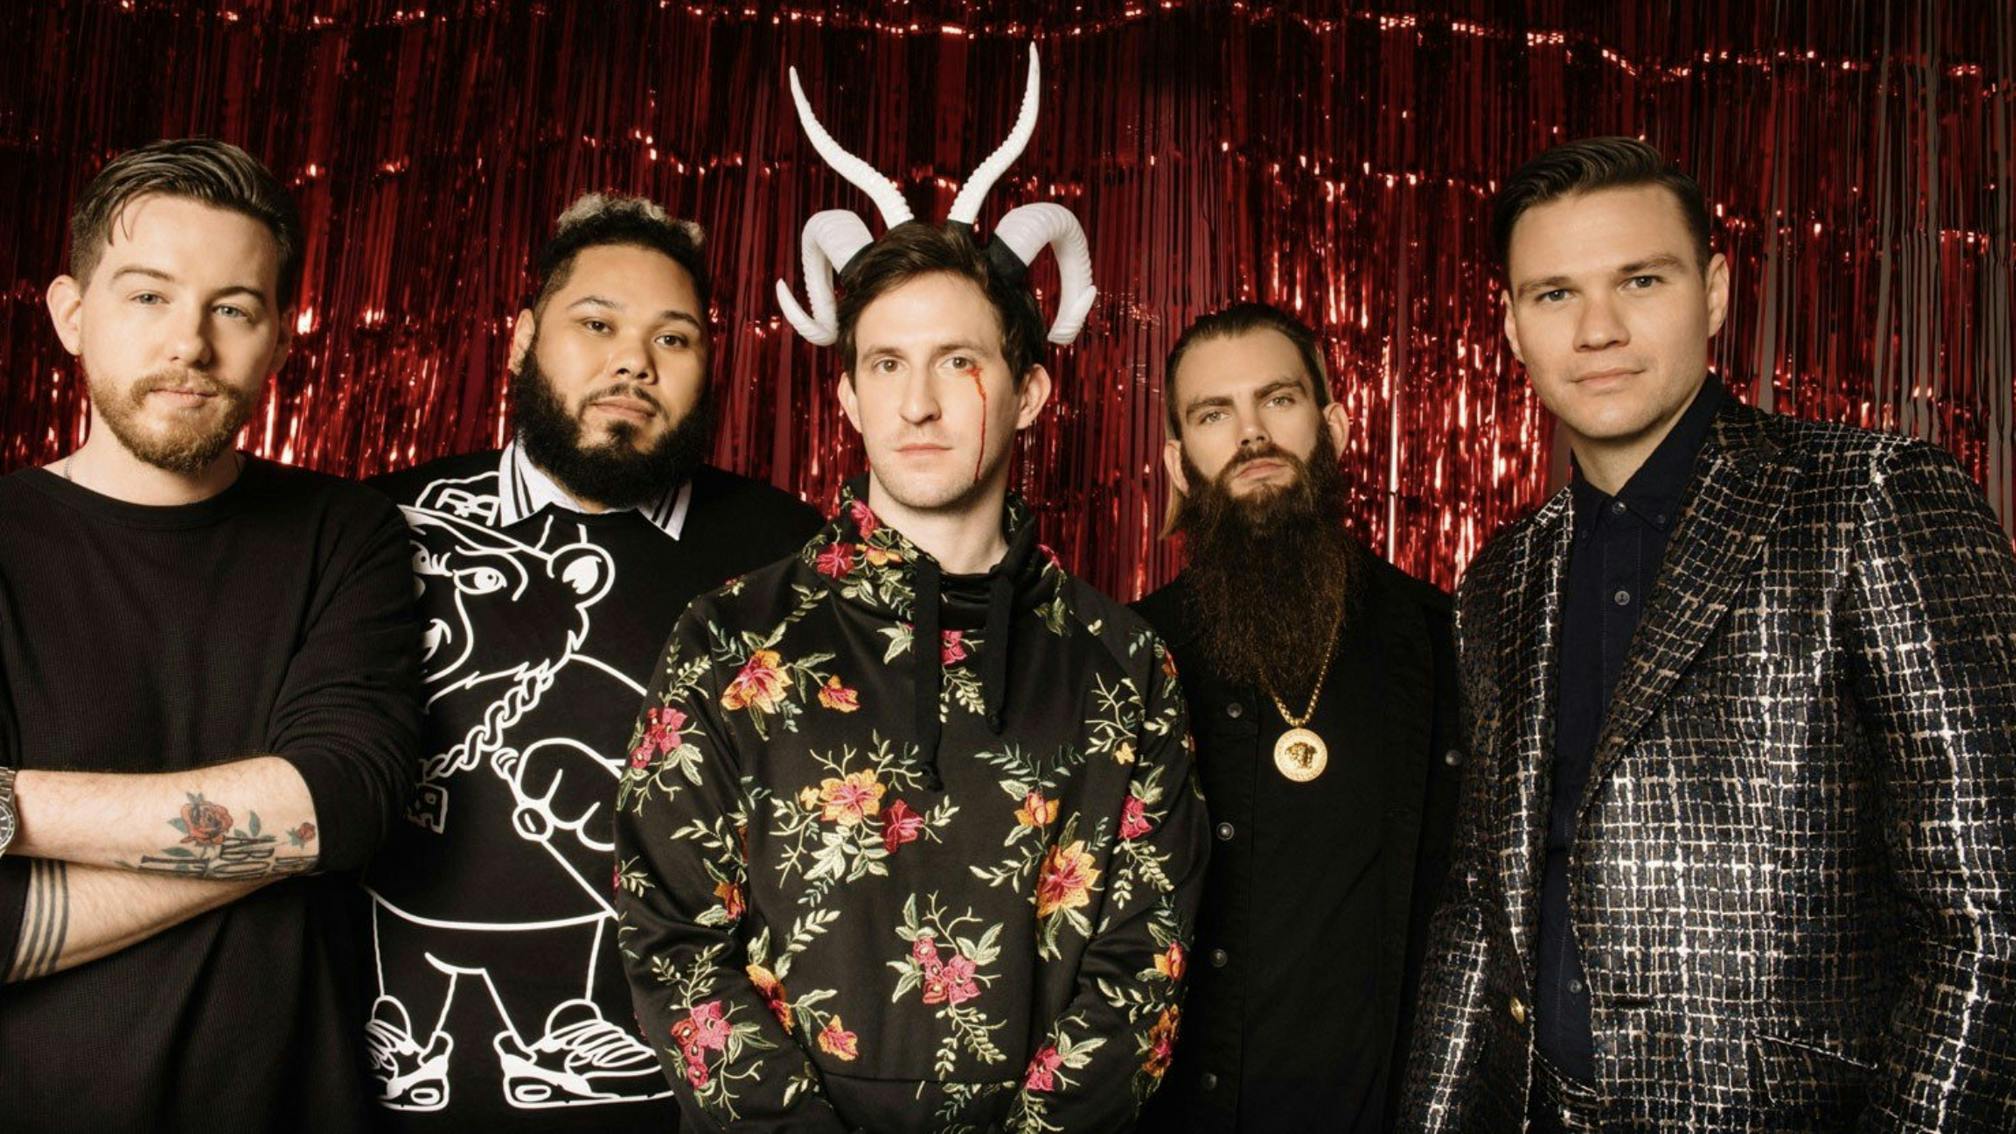 Dance Gavin Dance drummer leaves tour for rehab to address substance abuse issues